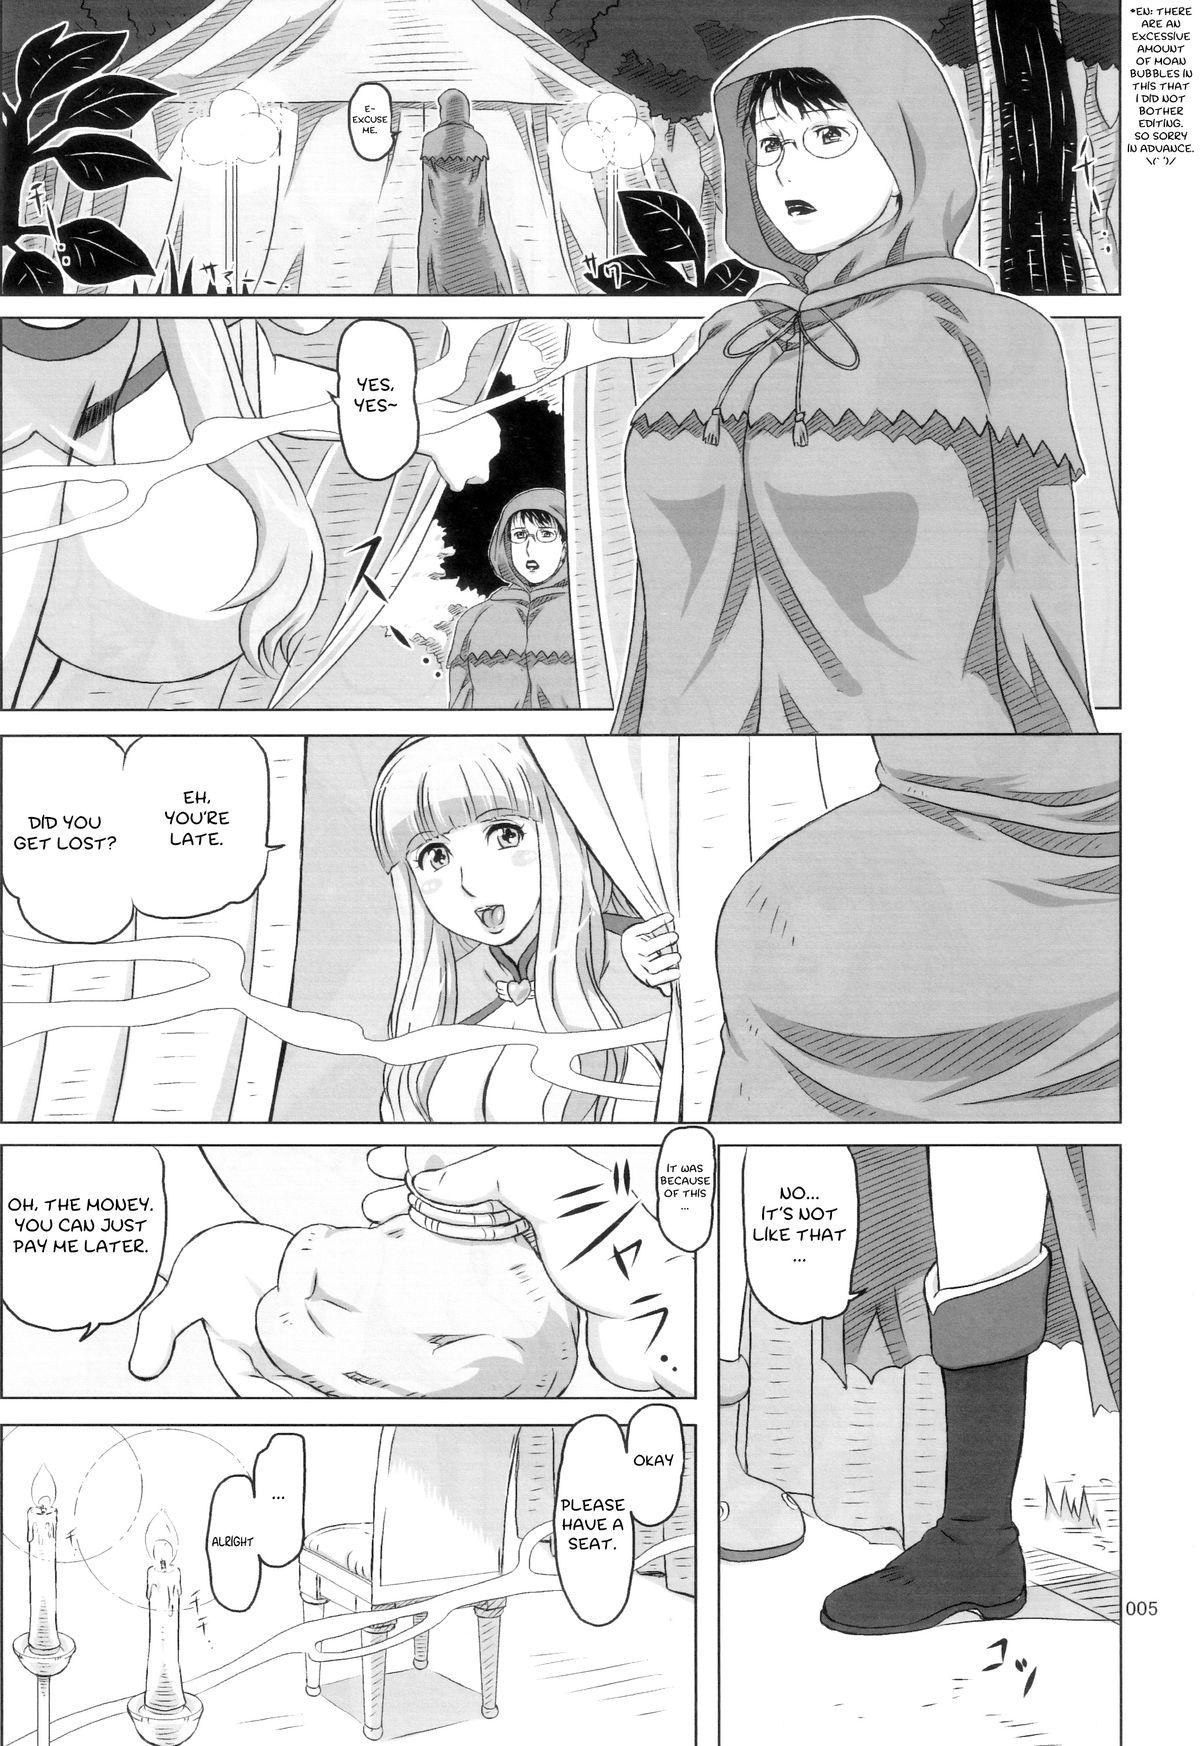 Amateur Porn Package Meat 4.5 - Queens blade Puta - Page 4